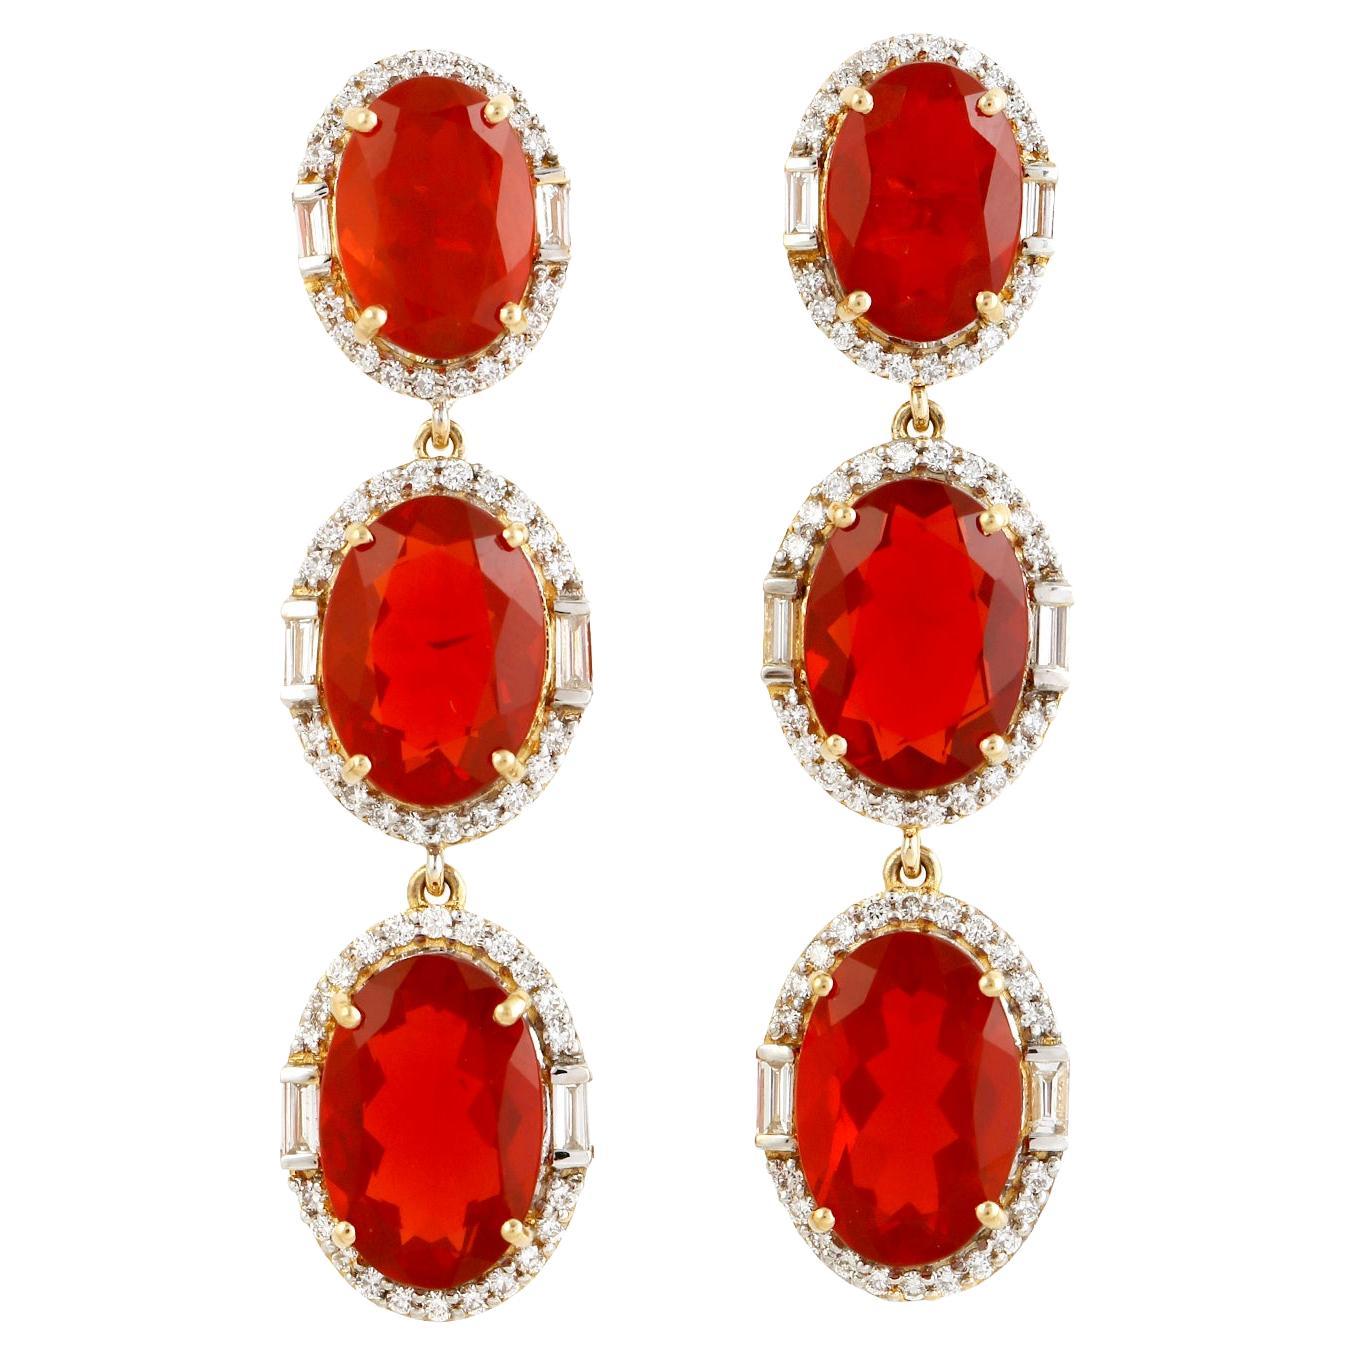 Three Tier Fire Opal Earrings With Pave Diamonds In 18k yellow Gold For Sale